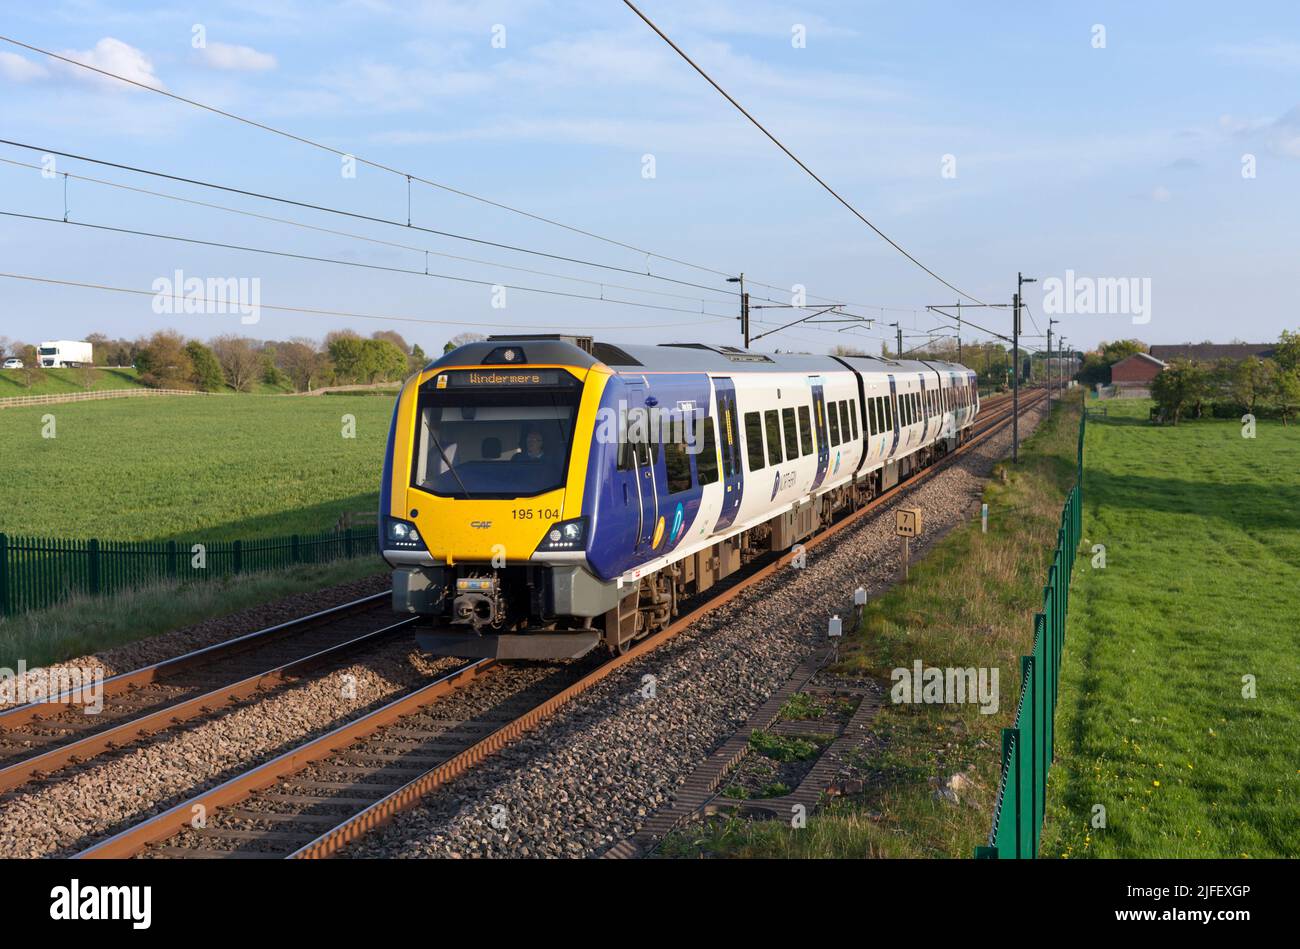 Northern rail class 195 CAF Civity diesel train on the electrified  west coast mainline railway line Stock Photo